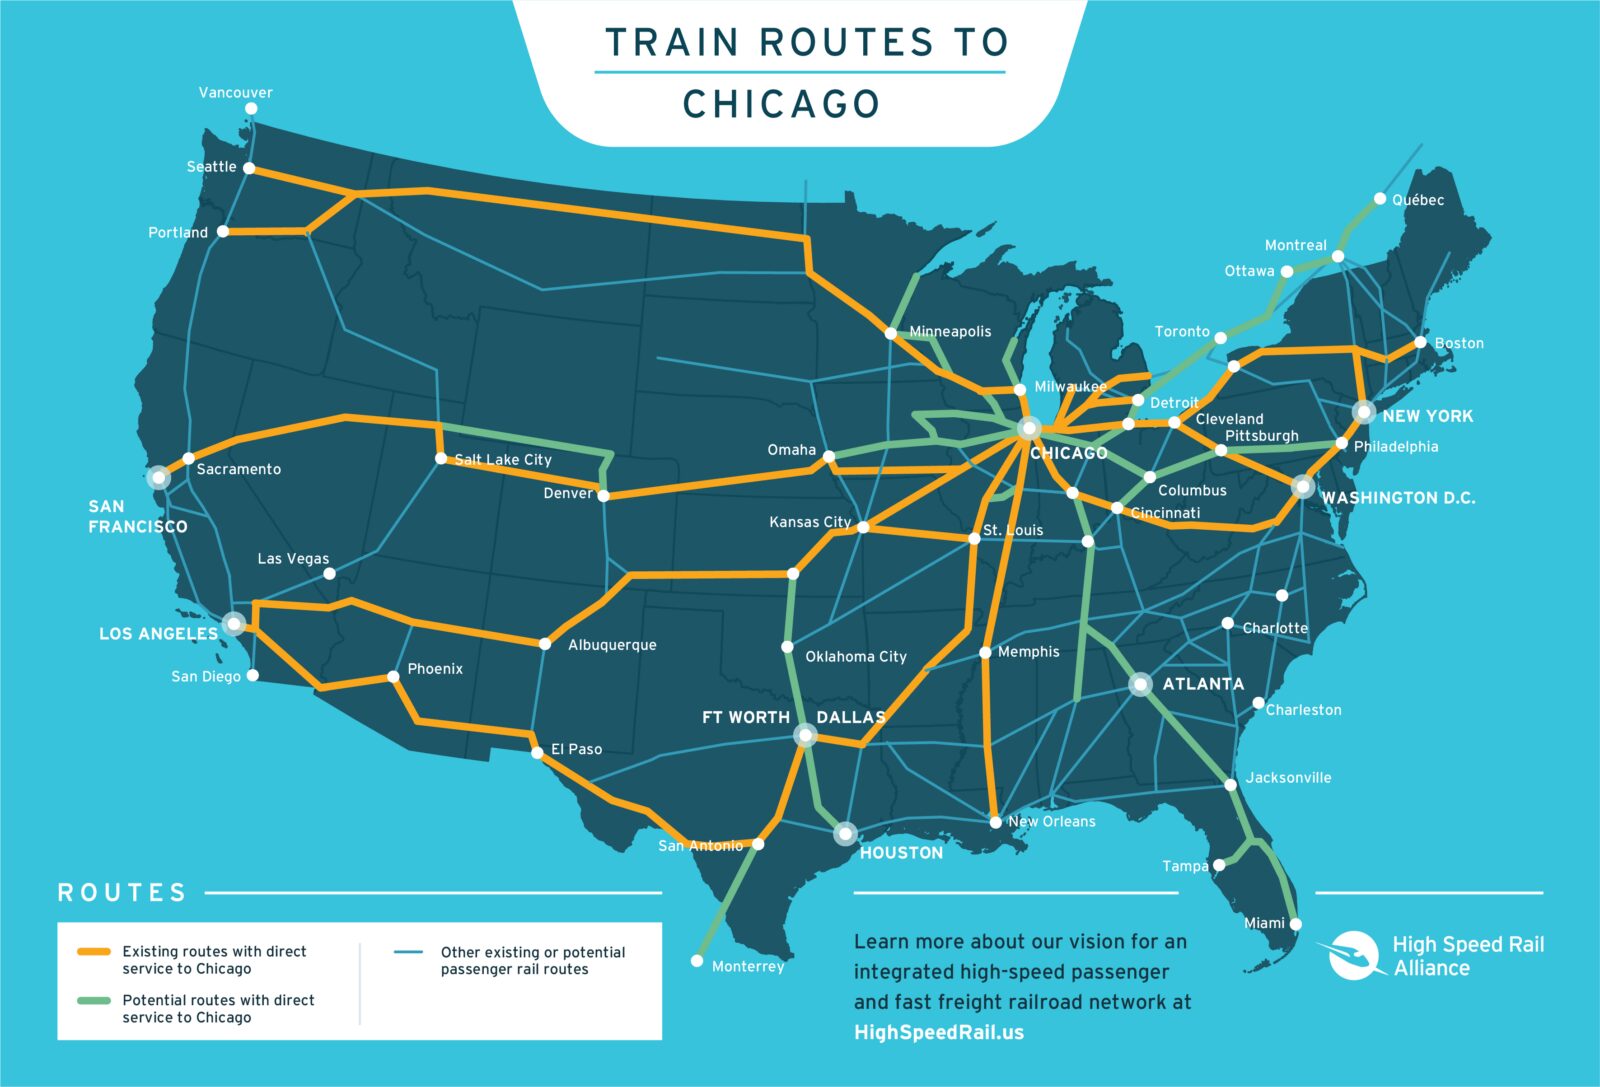 Investing for better trains nationwide just picked up major support